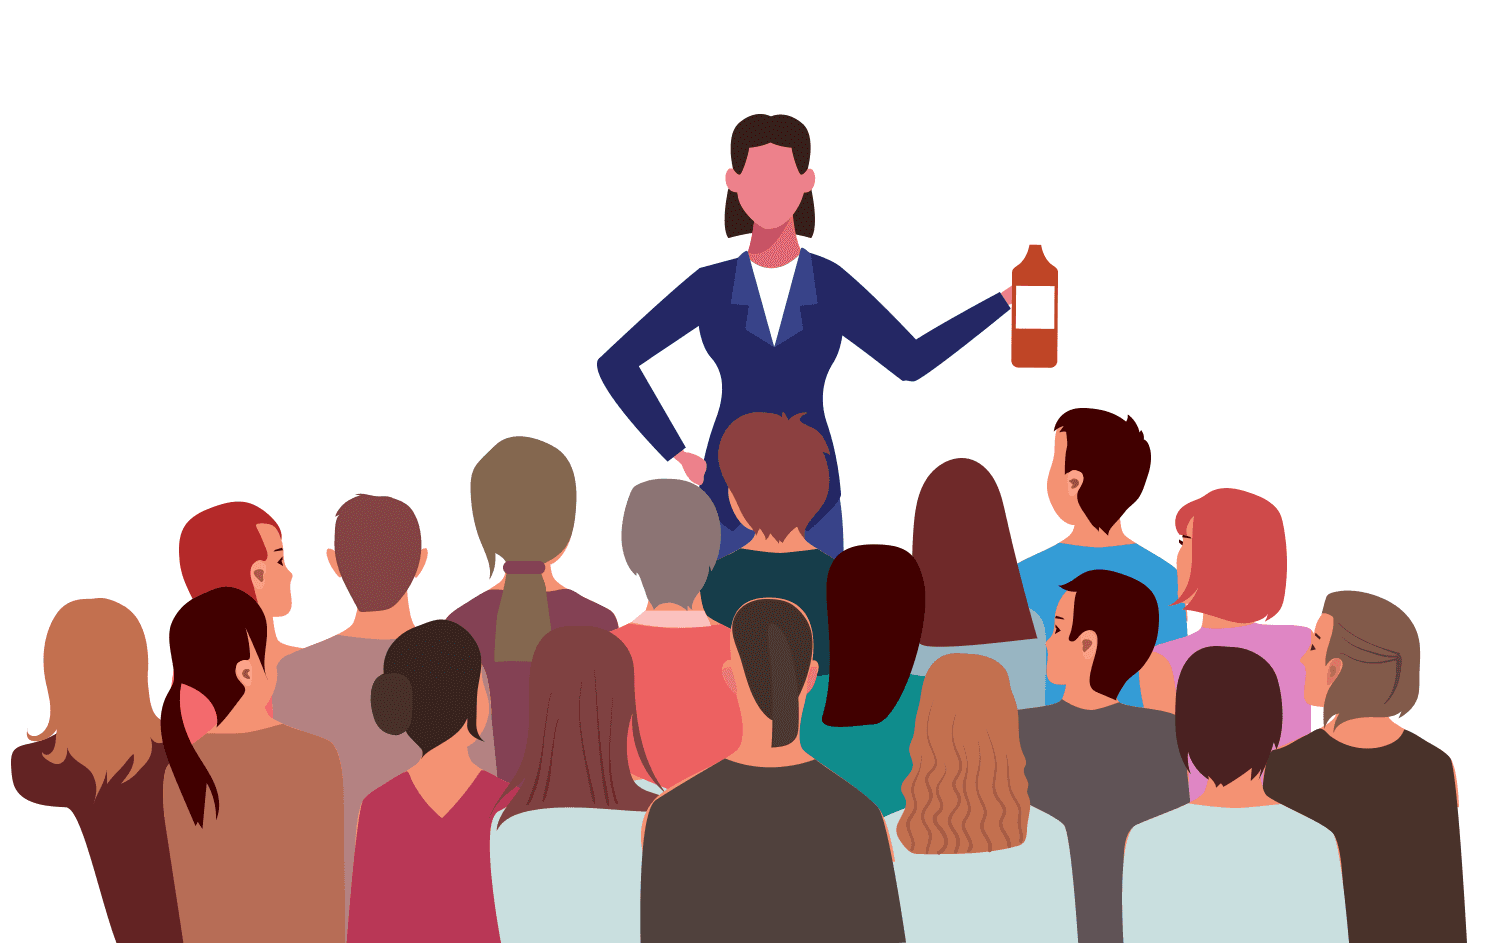 Cartoon representation of someone presenting a product to a crowd of people